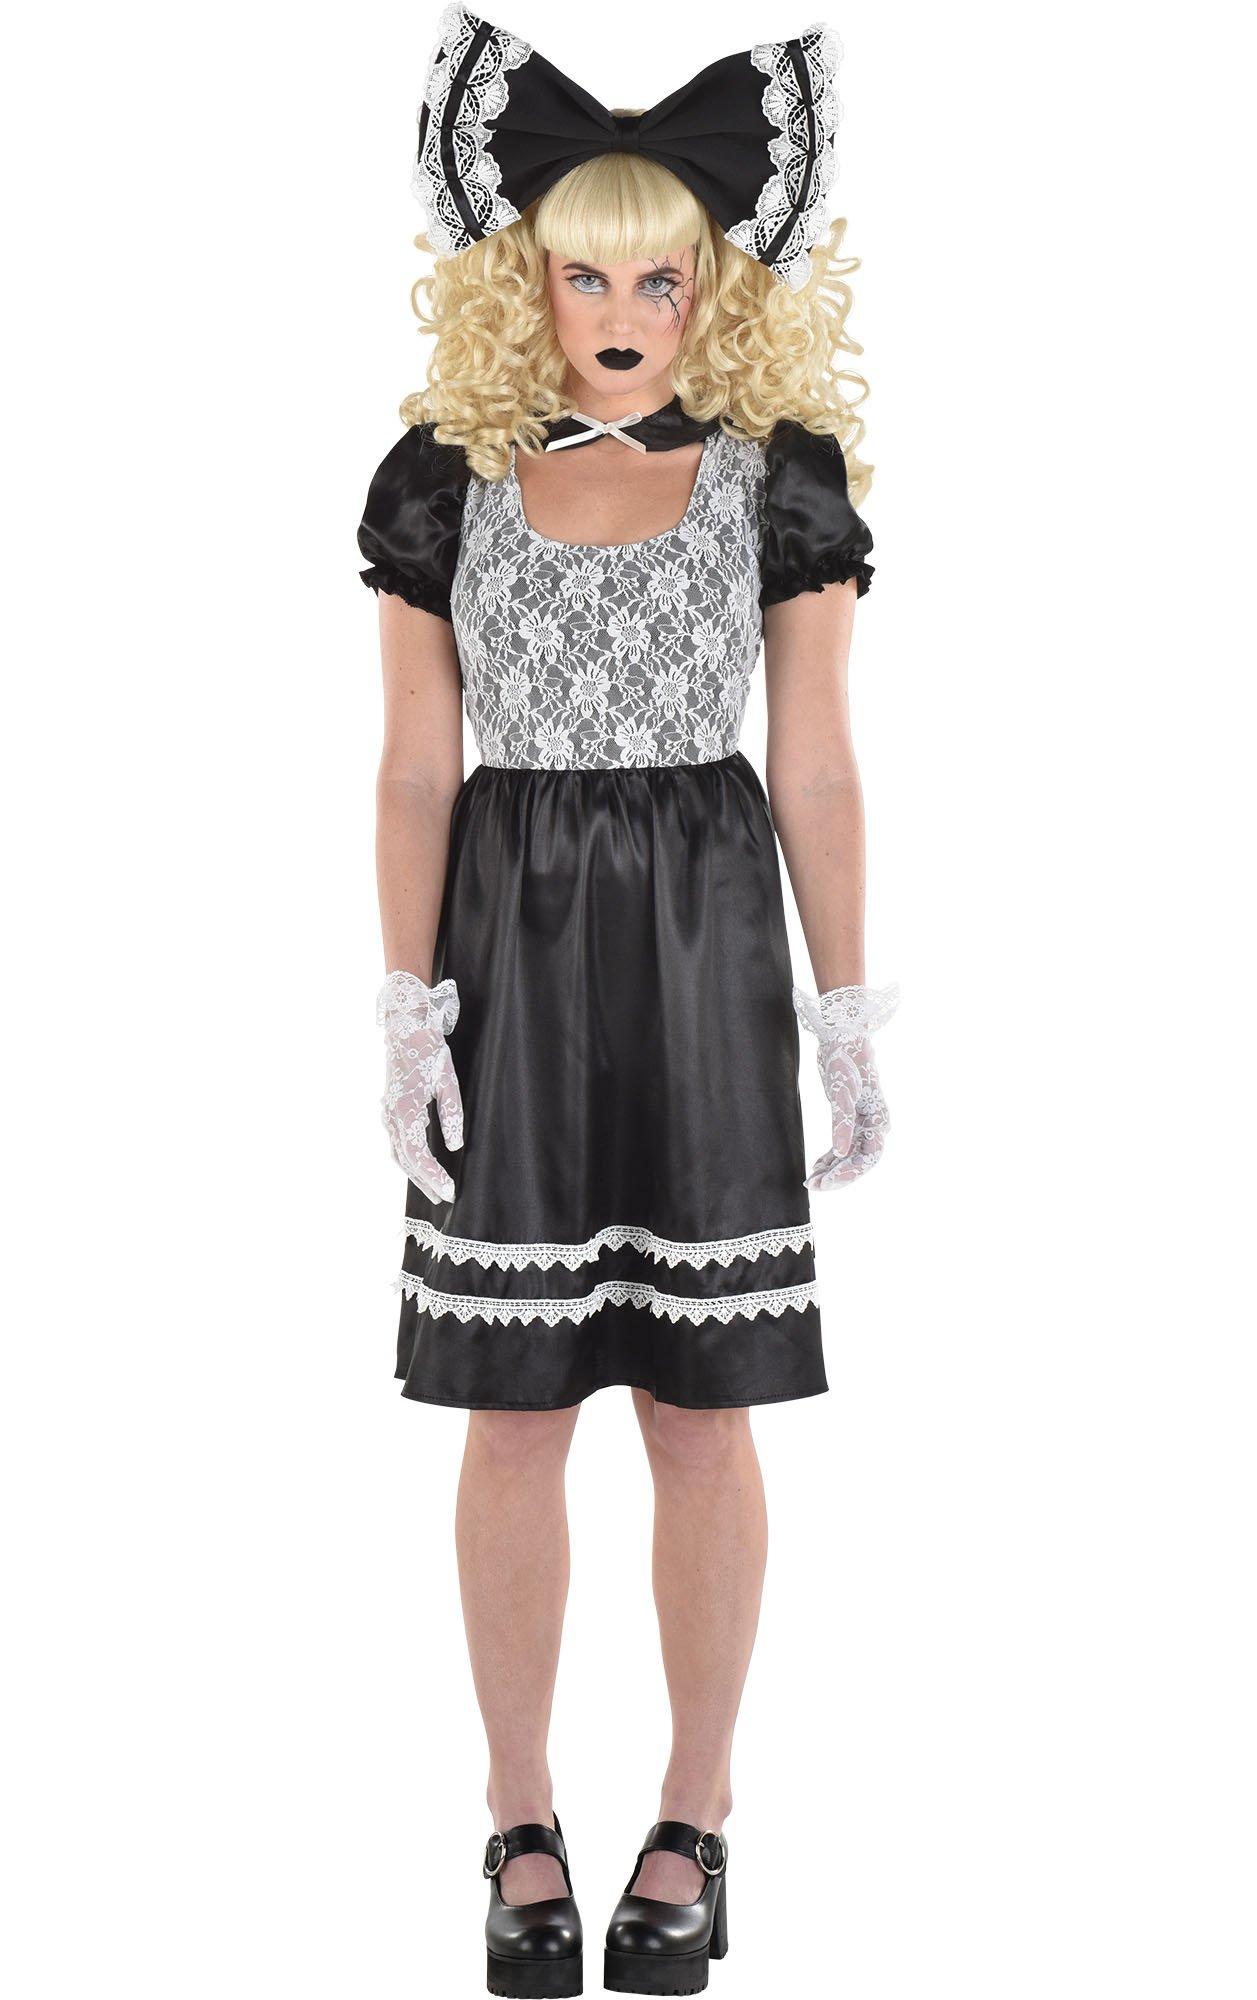 Doll Costumes for Women & Girls | Party City